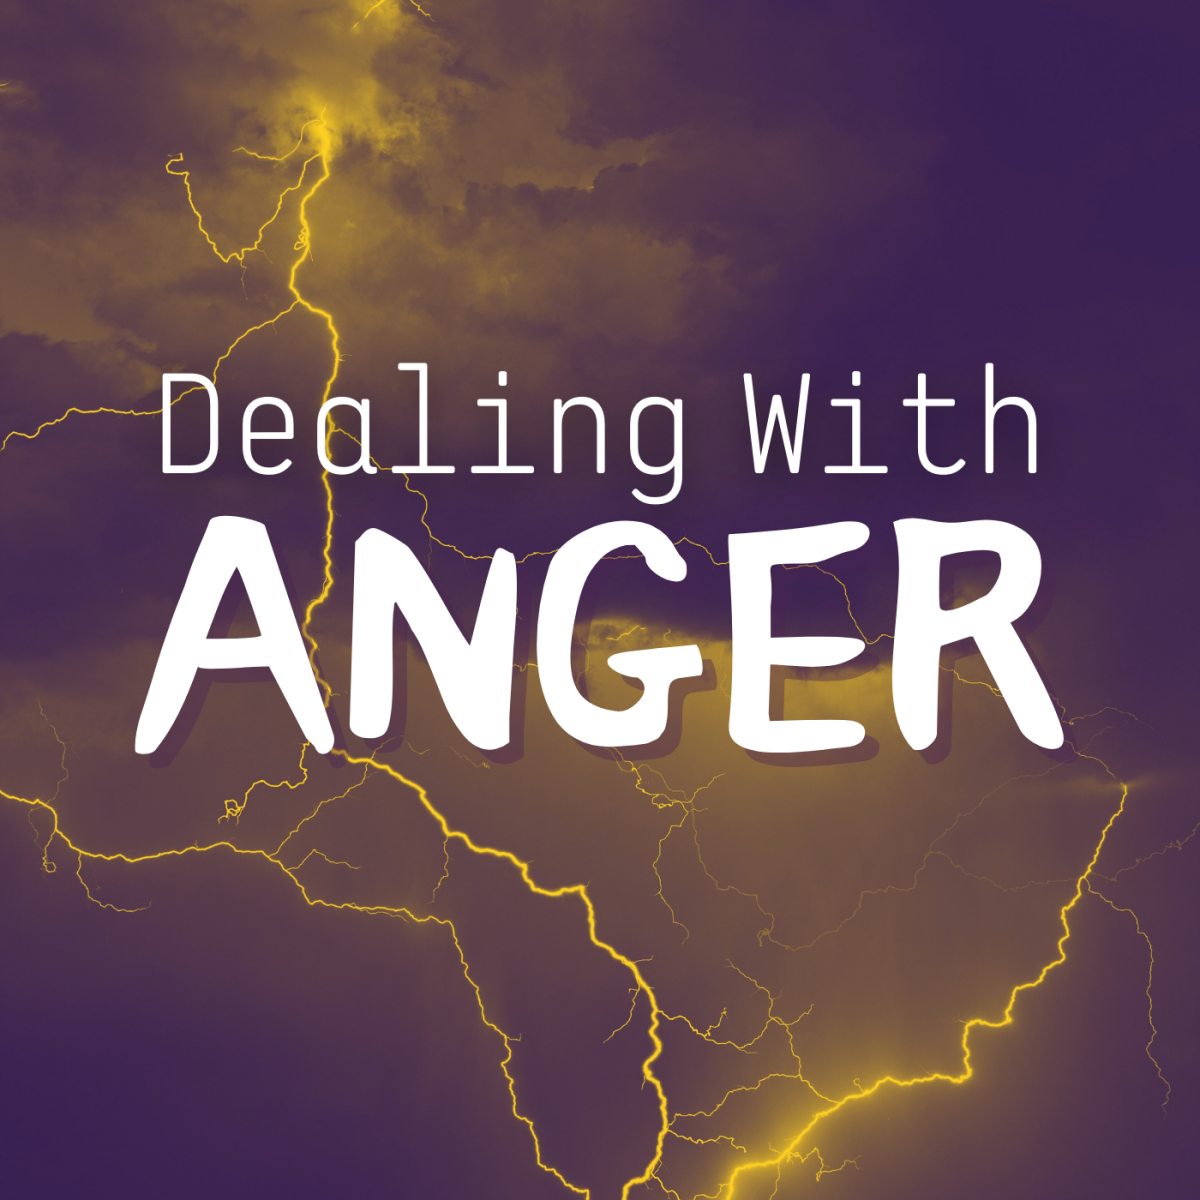 Get advice on expressing your anger in a healthy, positive way.